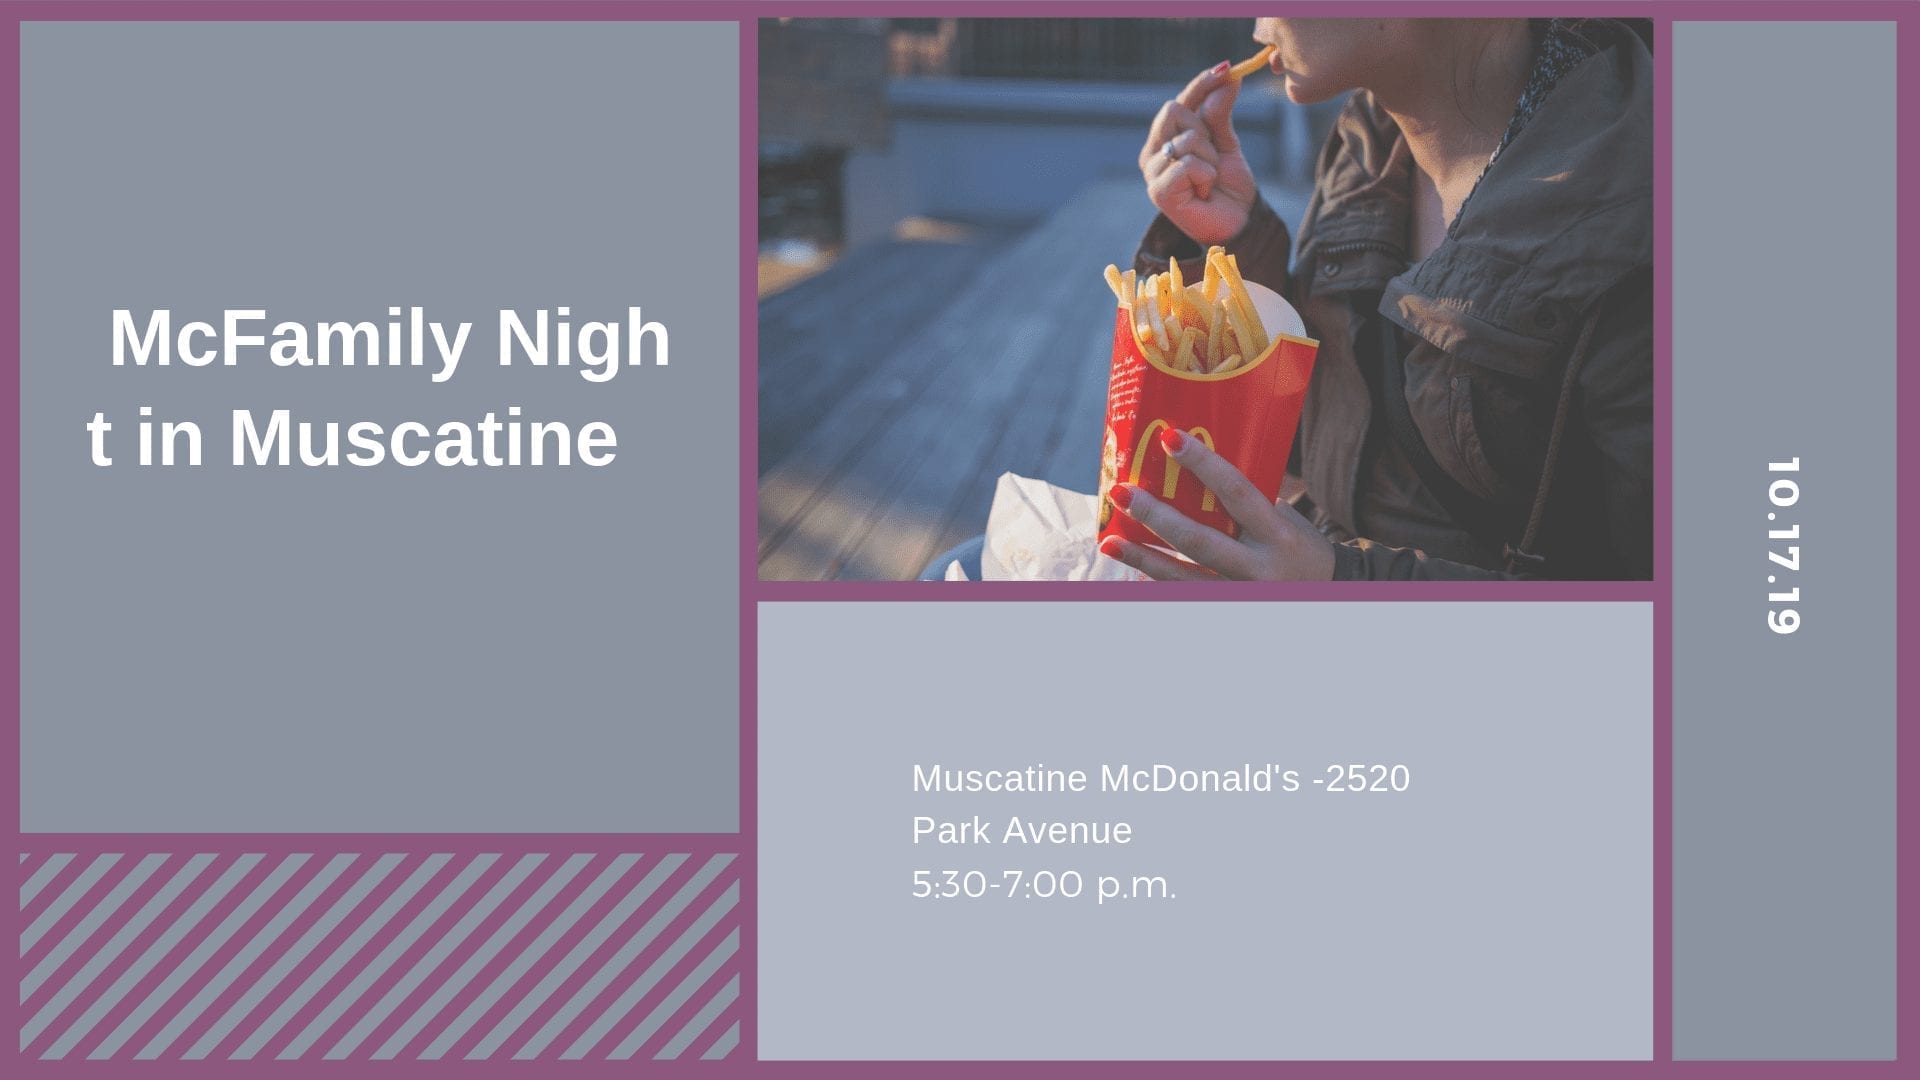 McFamily Night in Muscatine